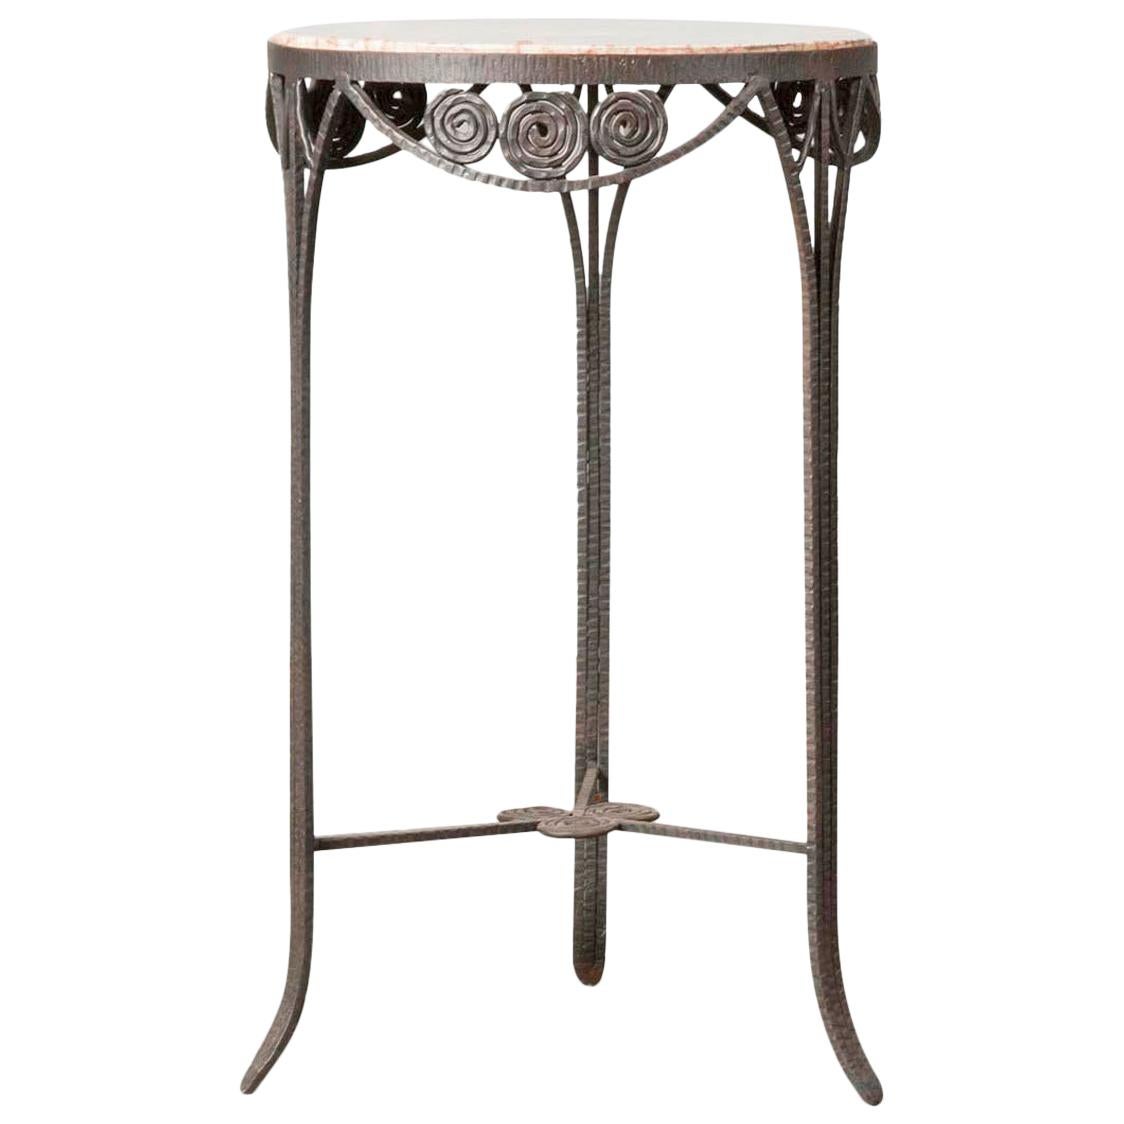 Wrought Iron and Marble Art Deco Table, France, 1930